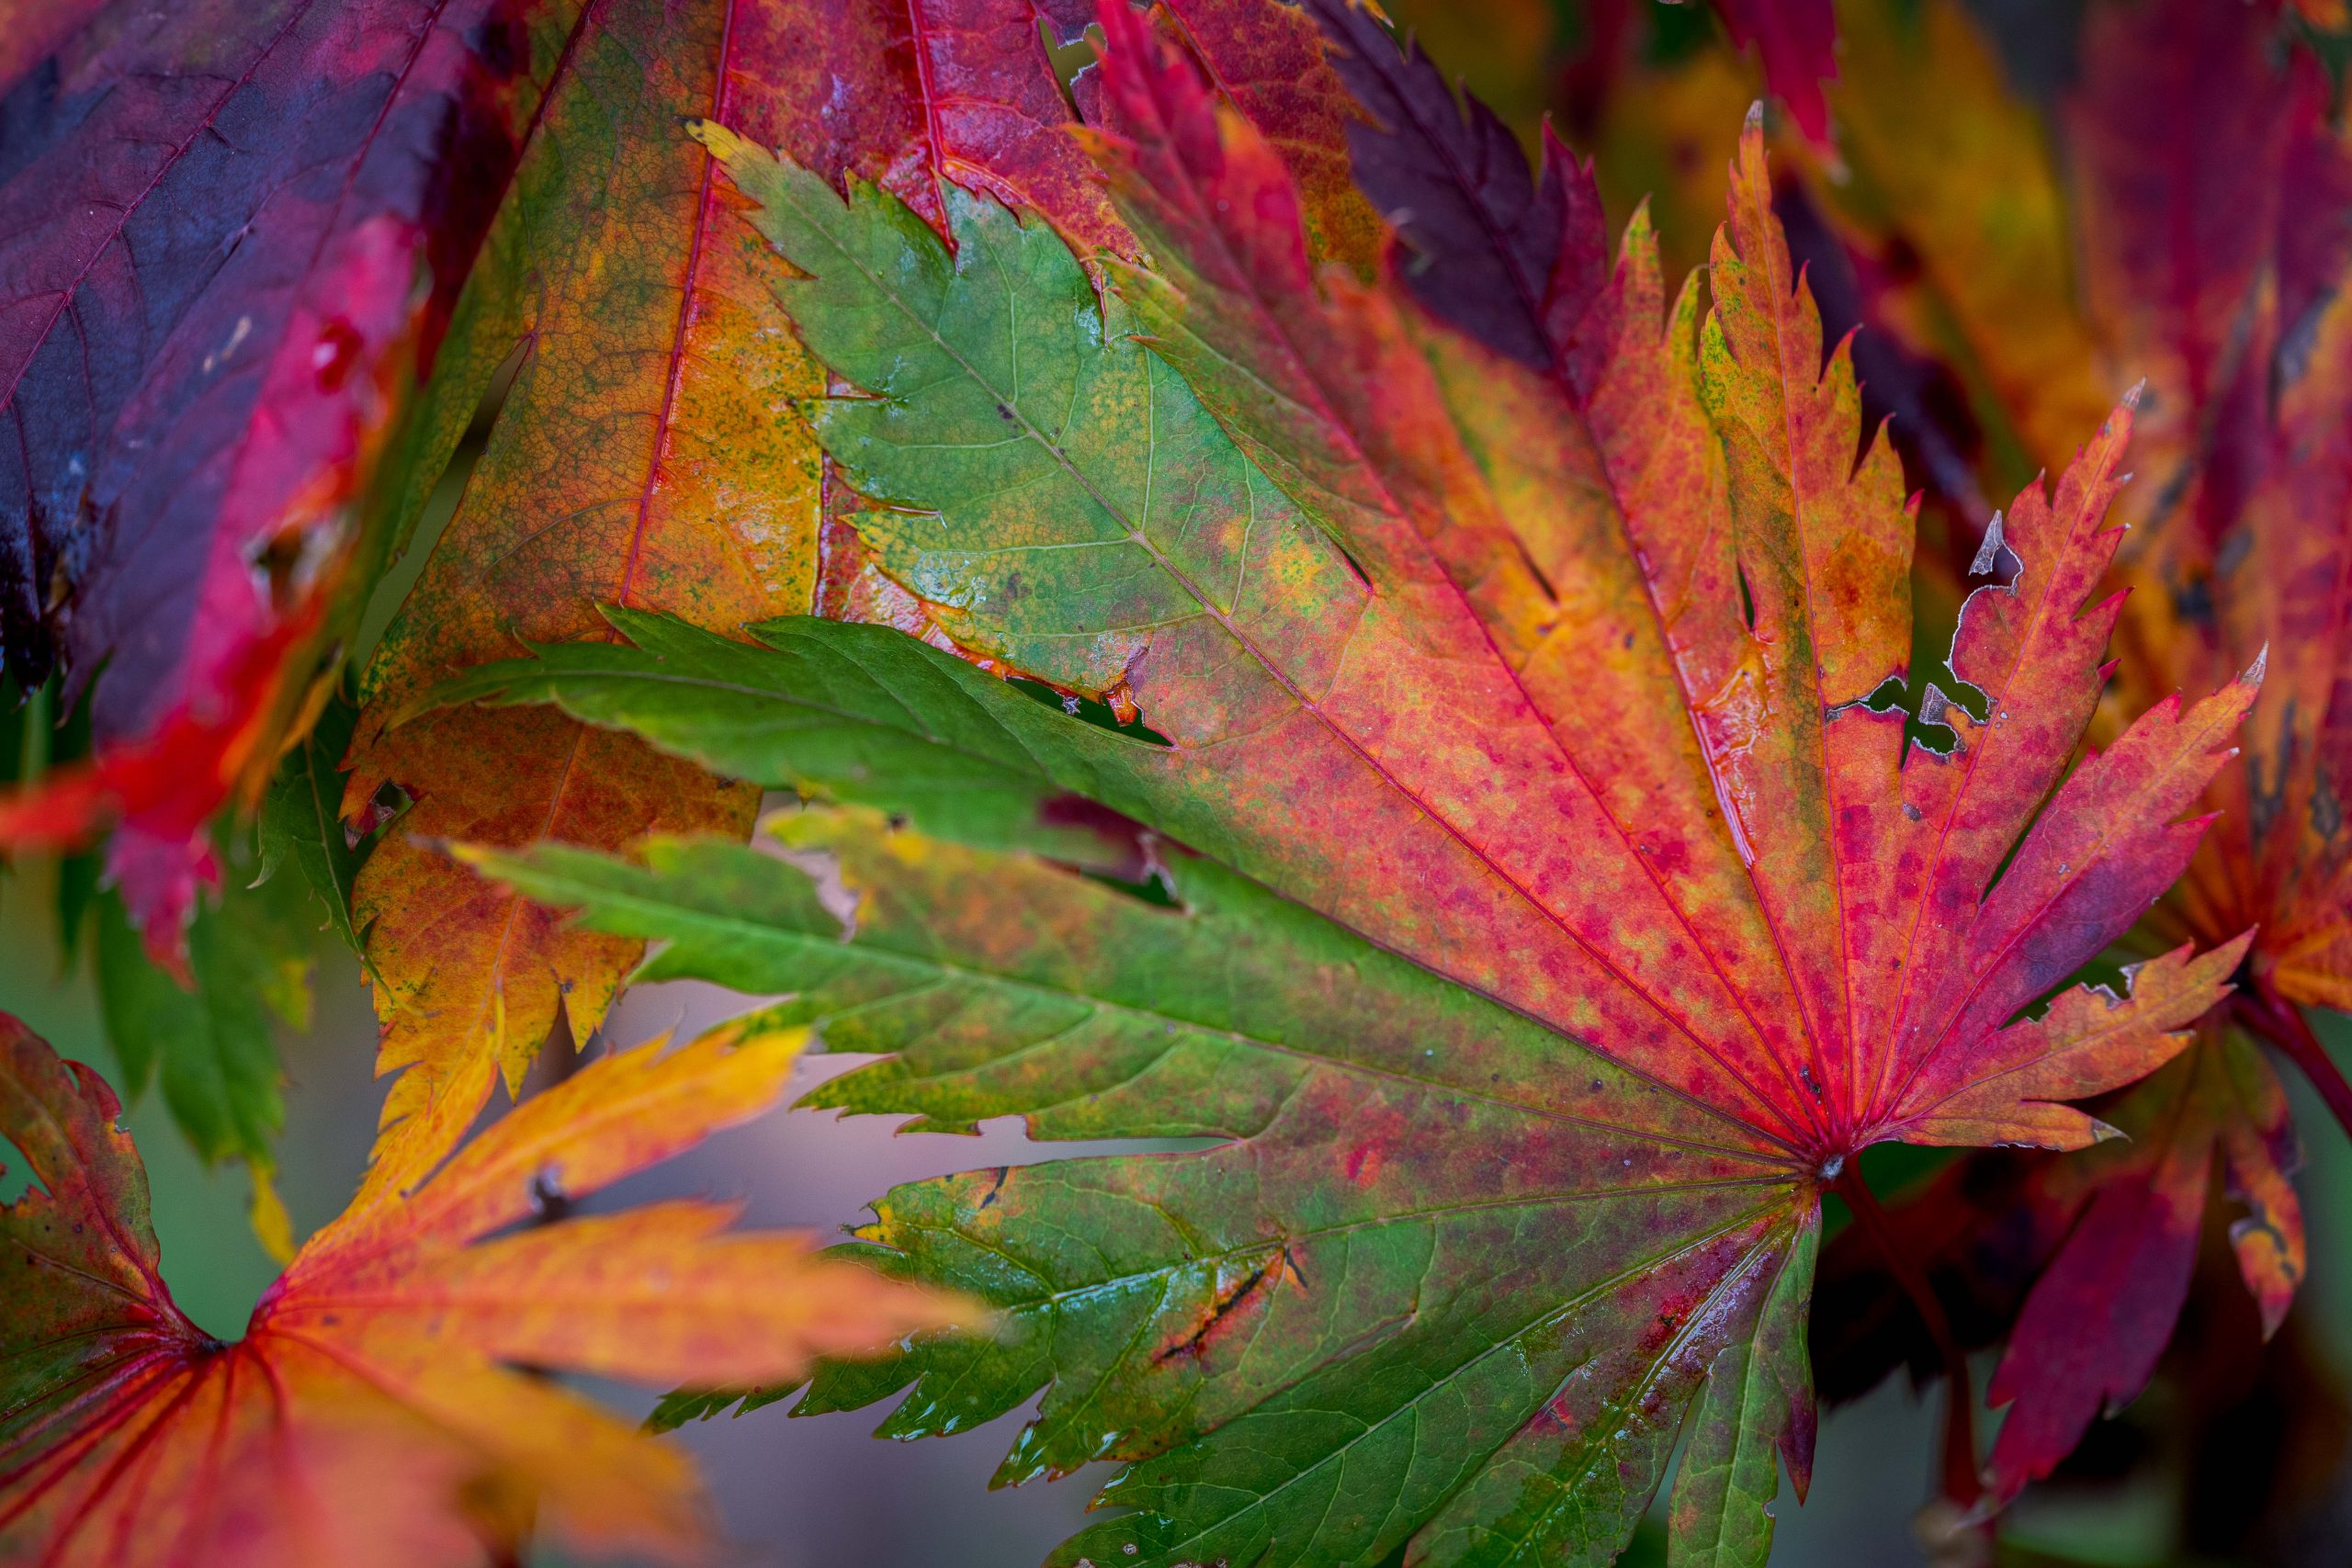 A close-up of green, red, and yellow fall leaves